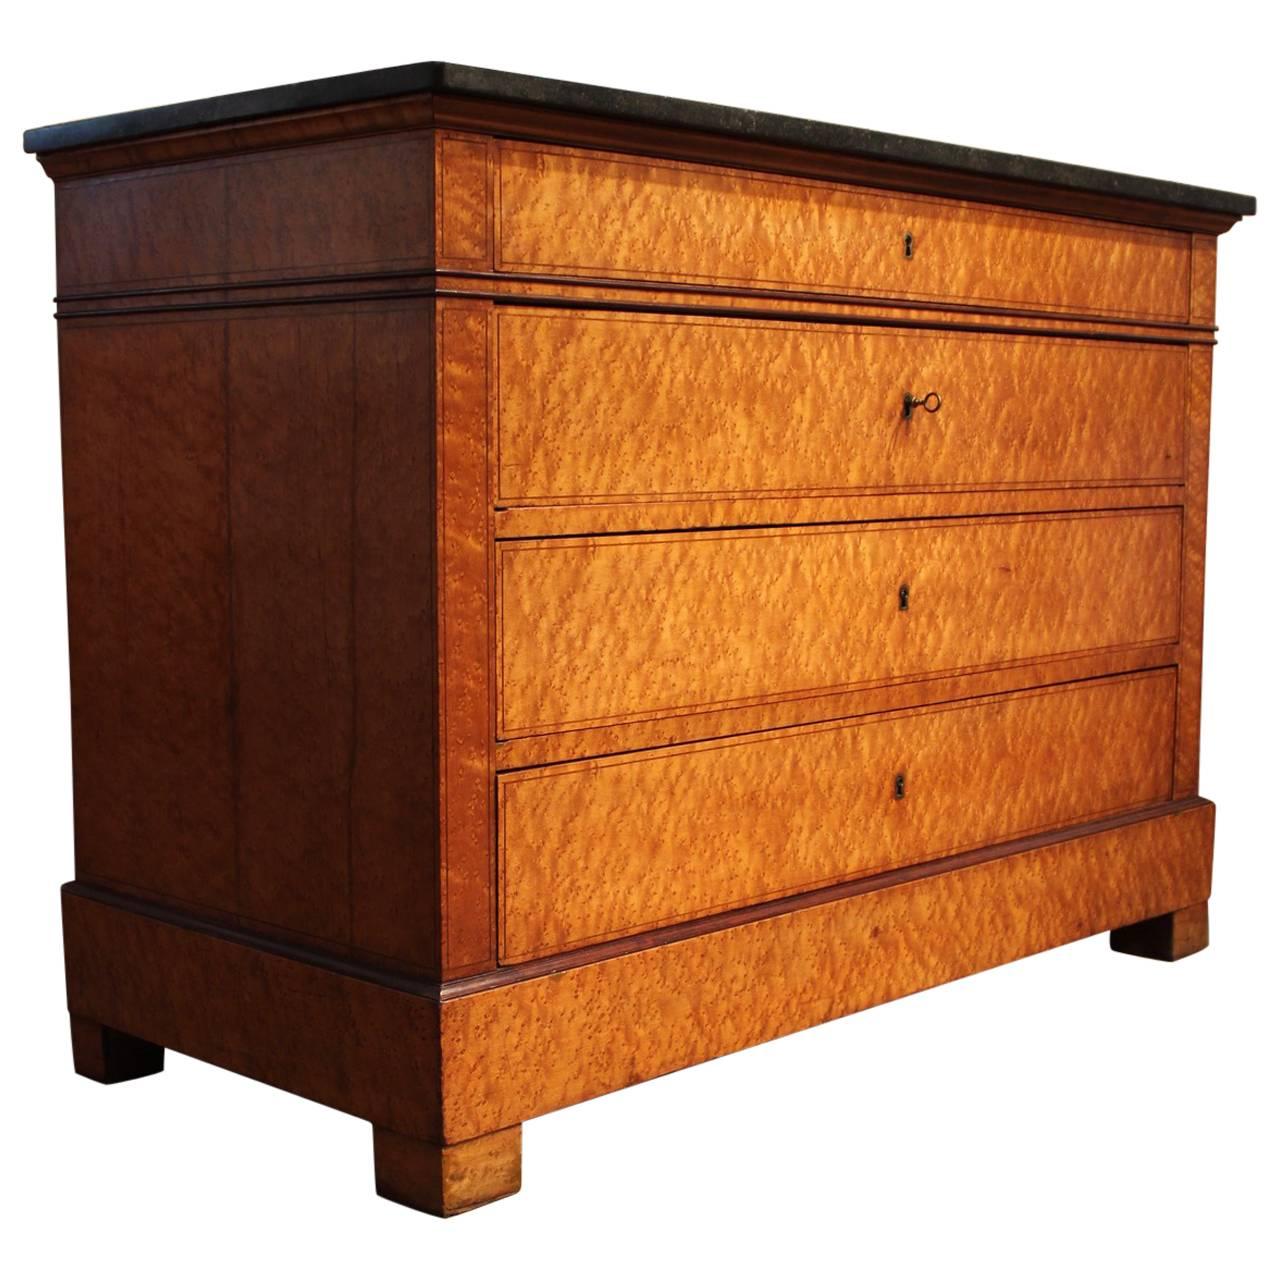 Early 19th Century French Charles X Bird's-Eye Maple Commode